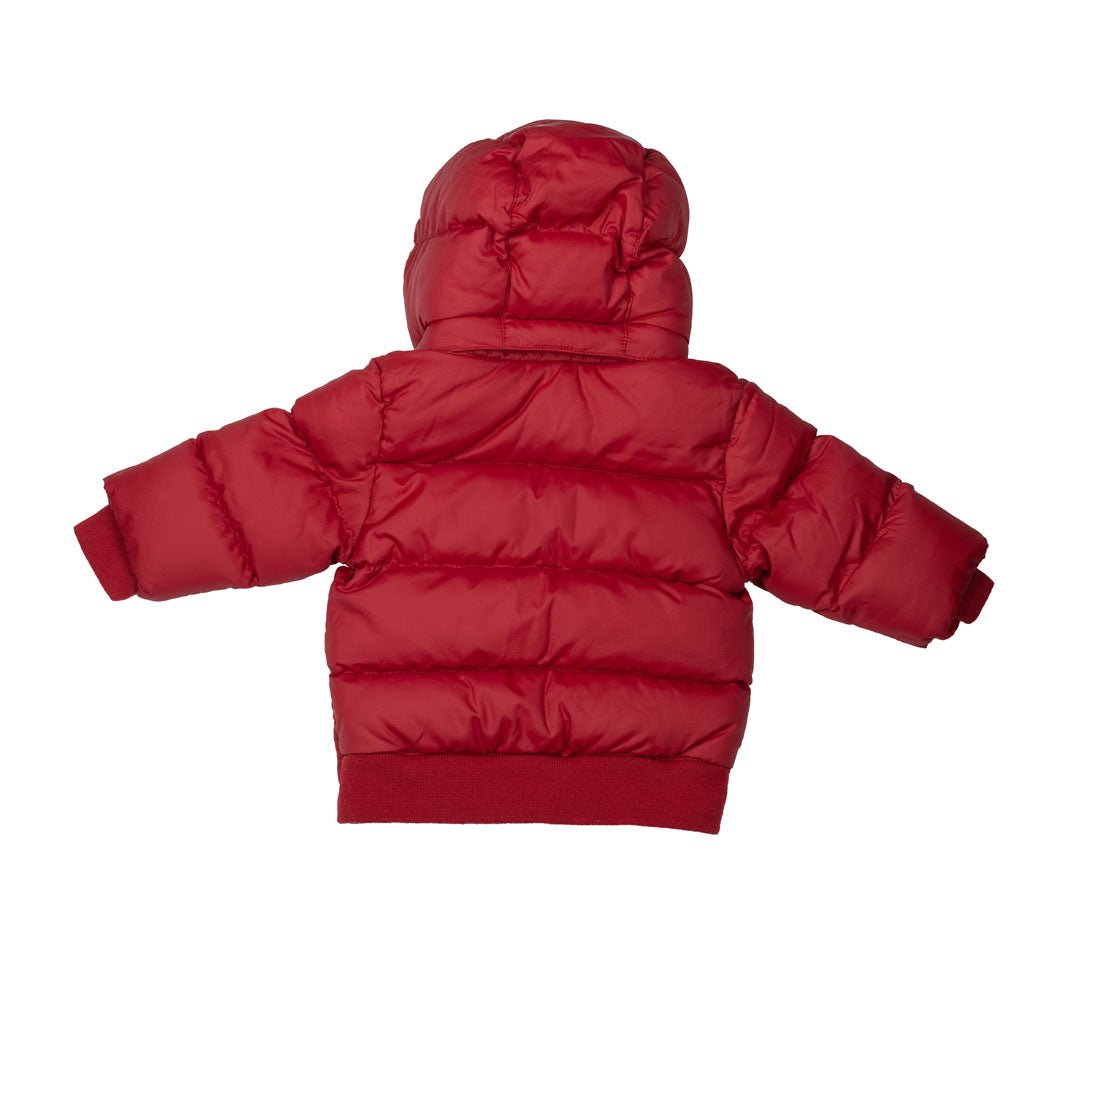 Burberry Waterproof Puffed Jacket for Boys - mymadstore.com